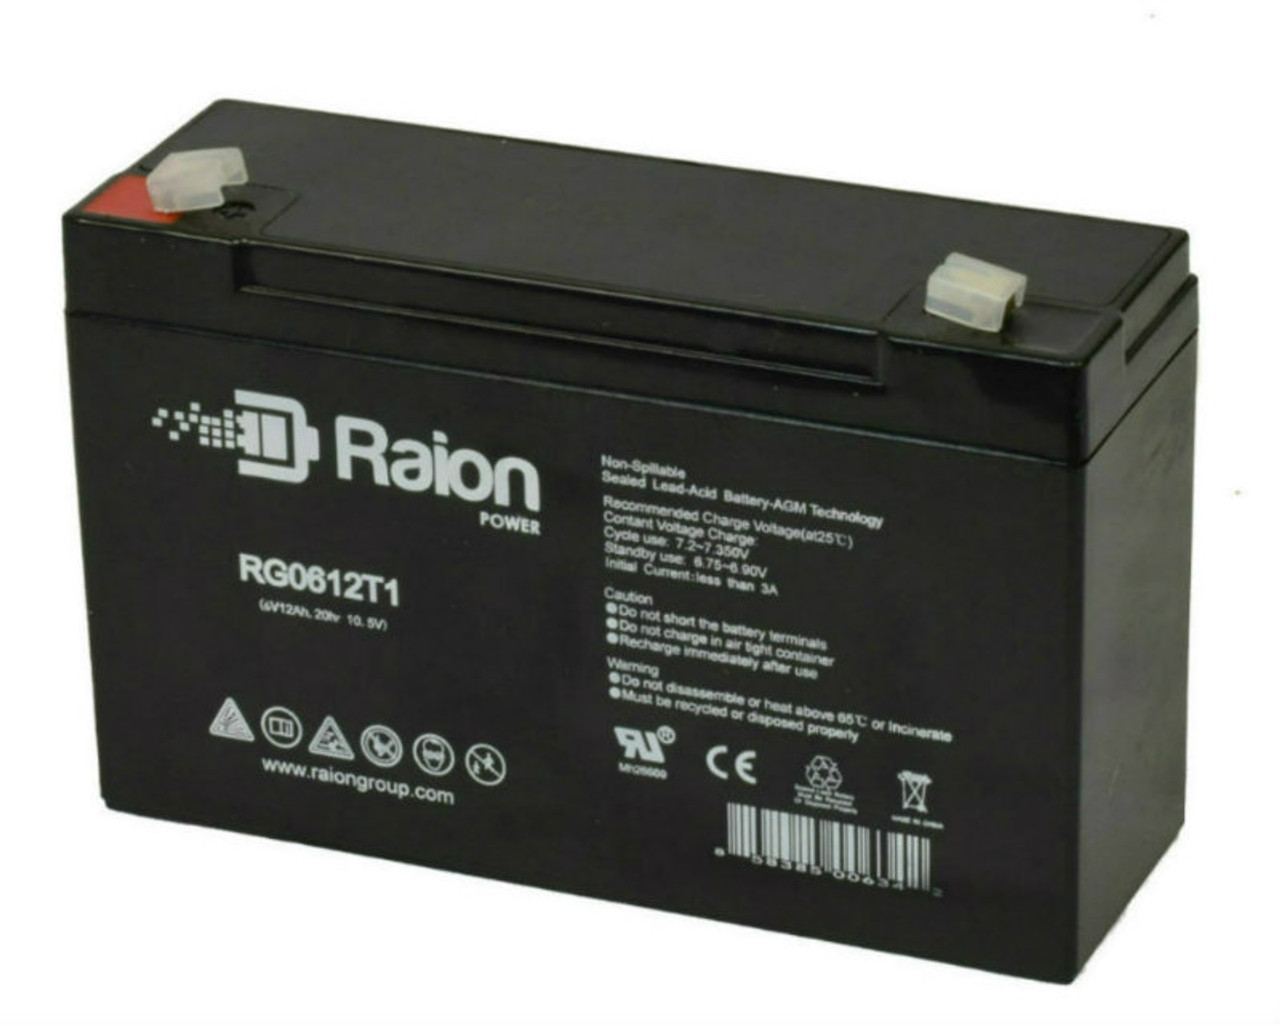 Raion Power RG06120T1 Replacement Battery for Baxter Healthcare 0007MCZZ Medical Equipment